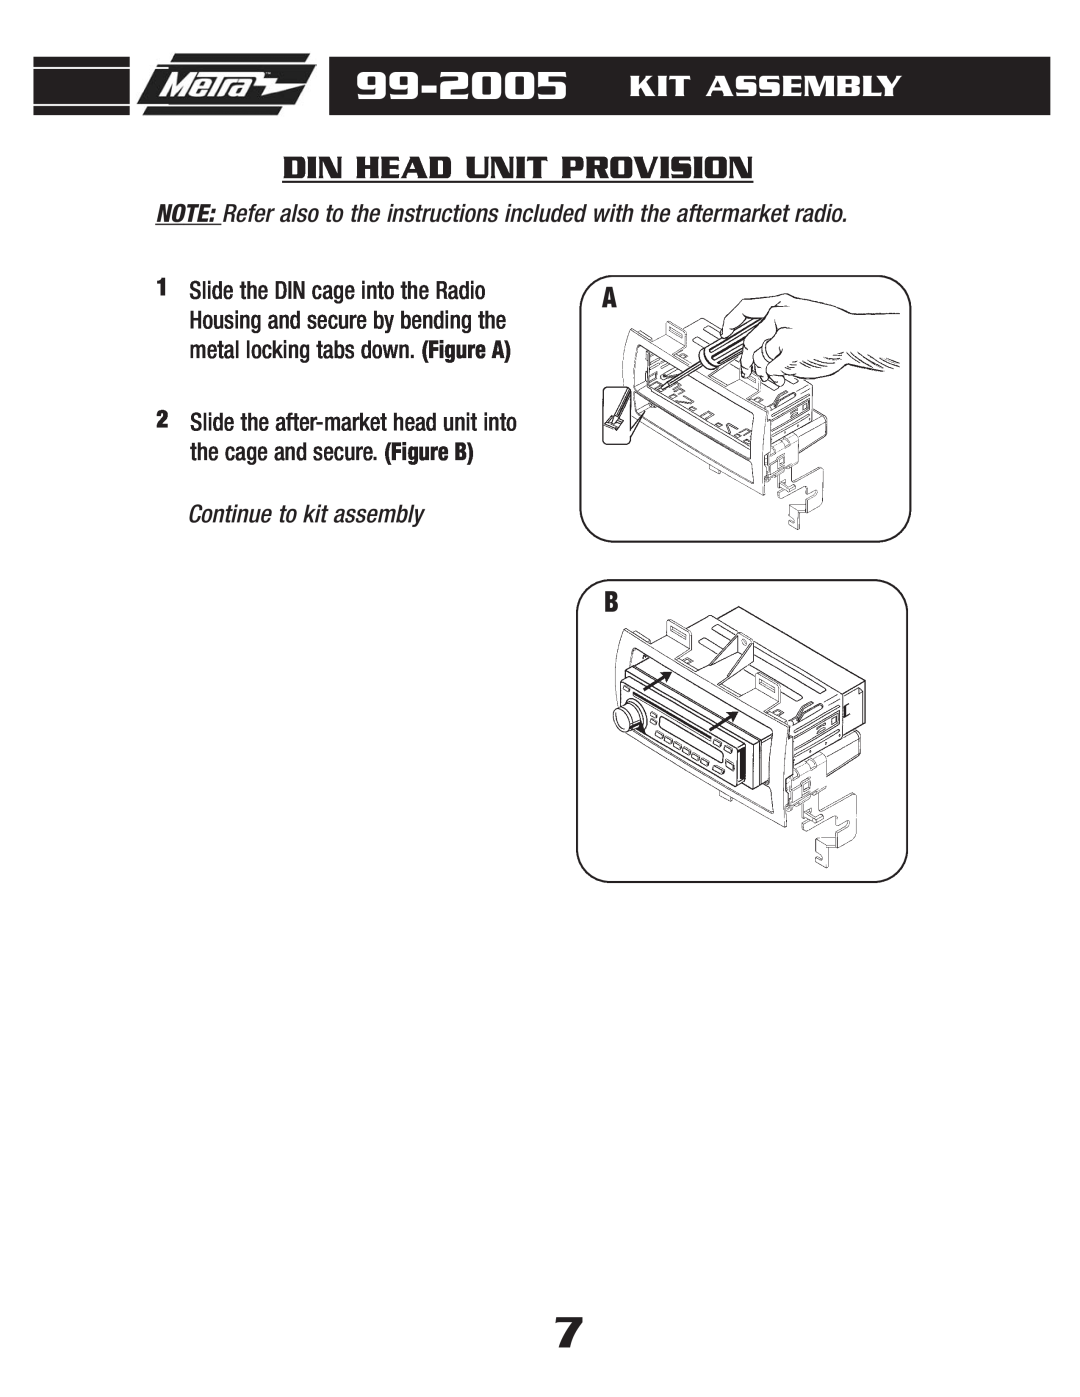 Metra Electronics 99-2005 installation instructions Din Head Unit Provision, Kit Assembly, Continue to kit assembly 